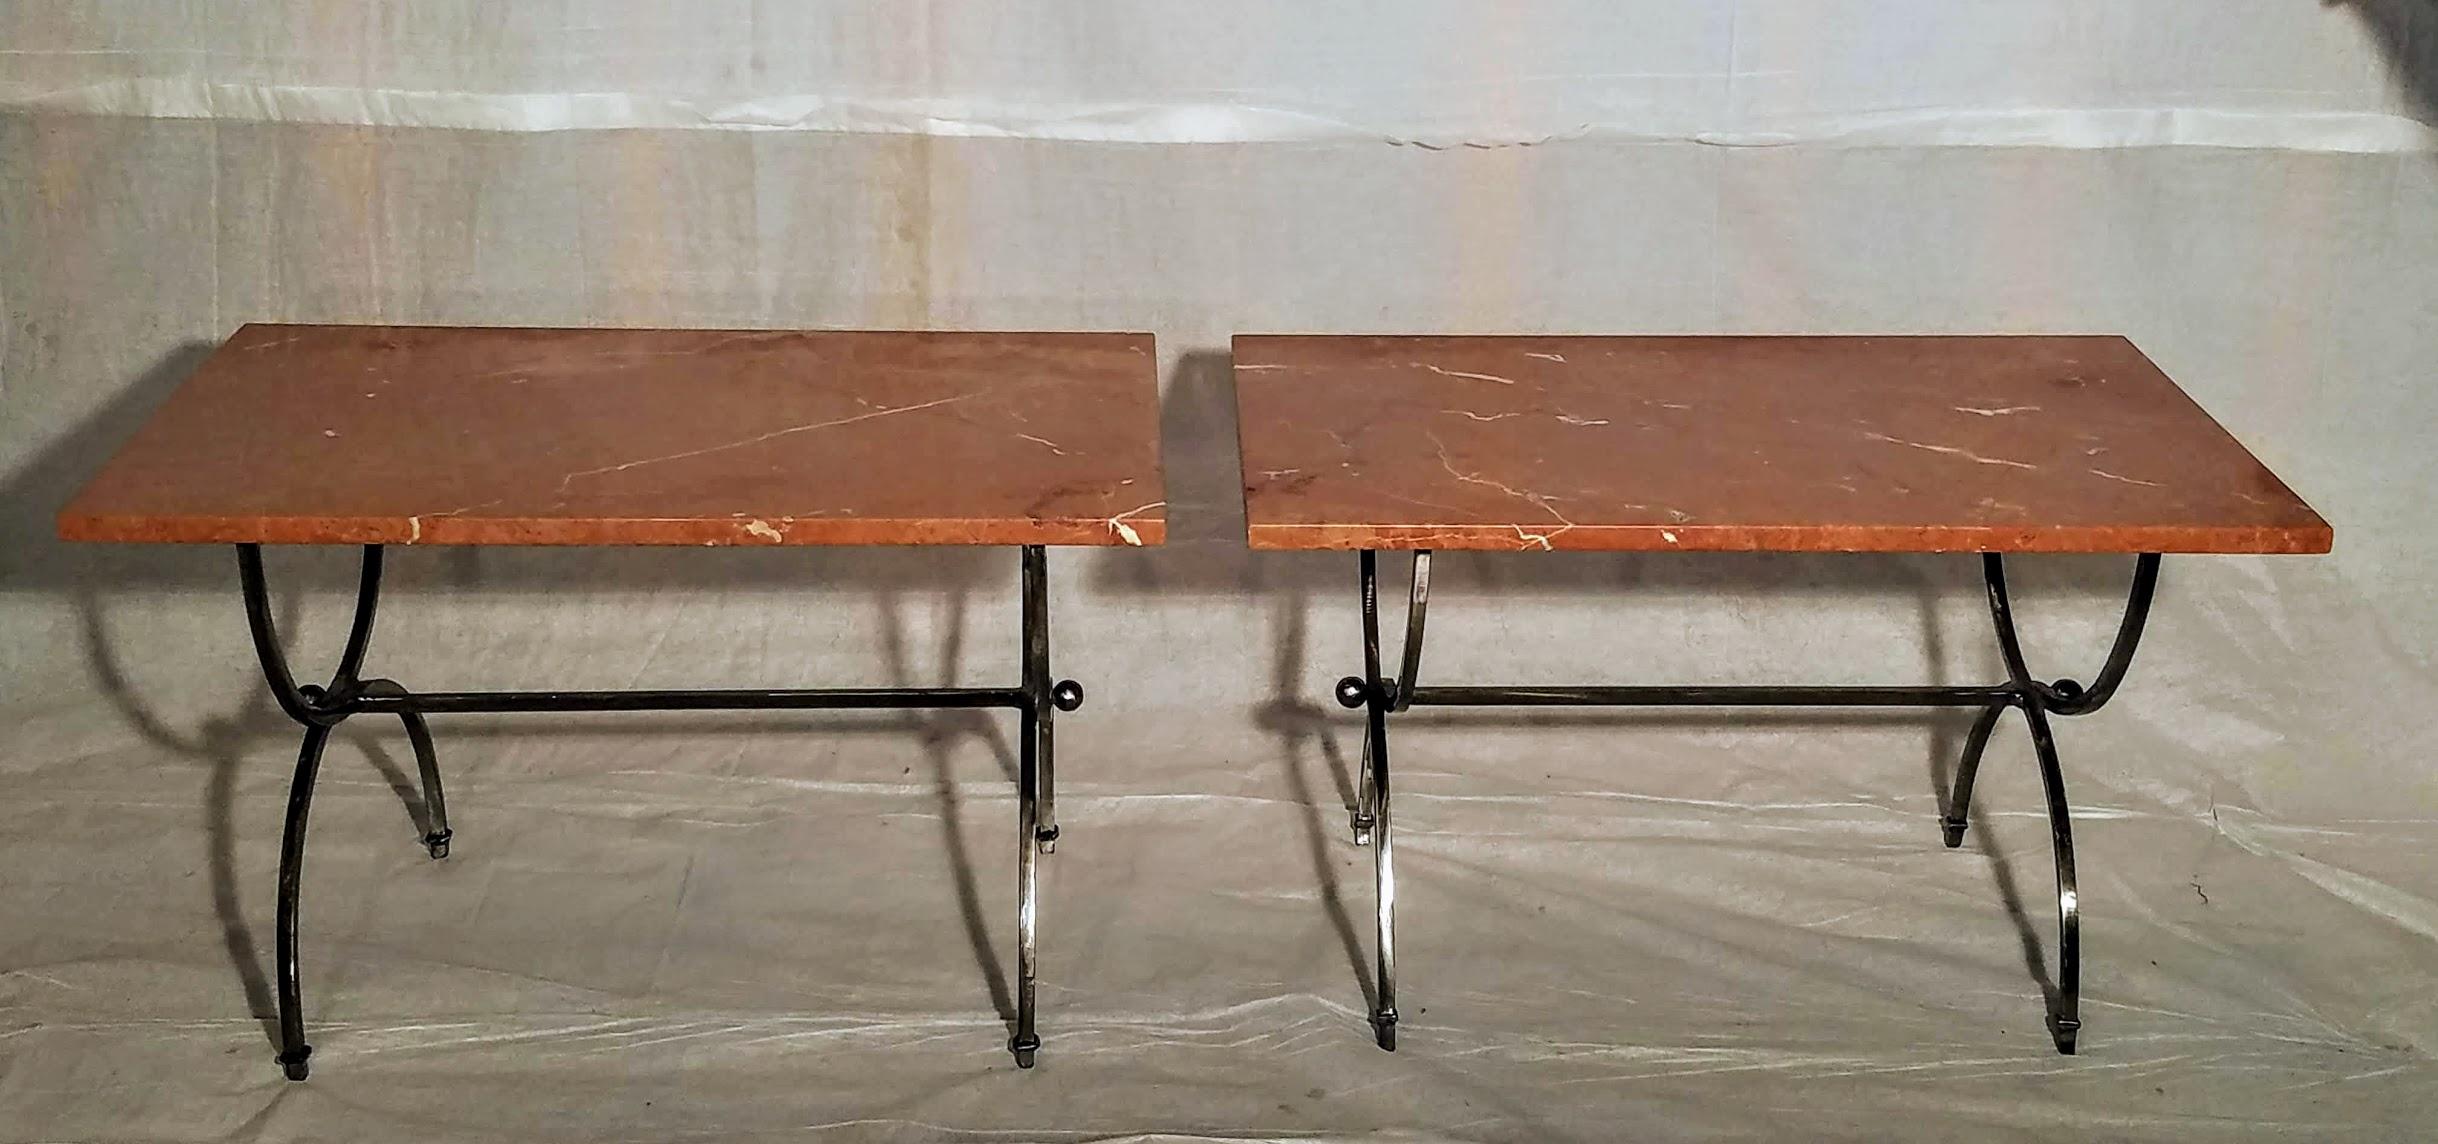 Side tables in the style of Billy Haines. Polished steel neoclassical forms topped in Rojo Alicante marble.
An interesting choice of materials from the 1960s.
Ex- estate of Alan Moss.
In excellent vintage condition as pictured.